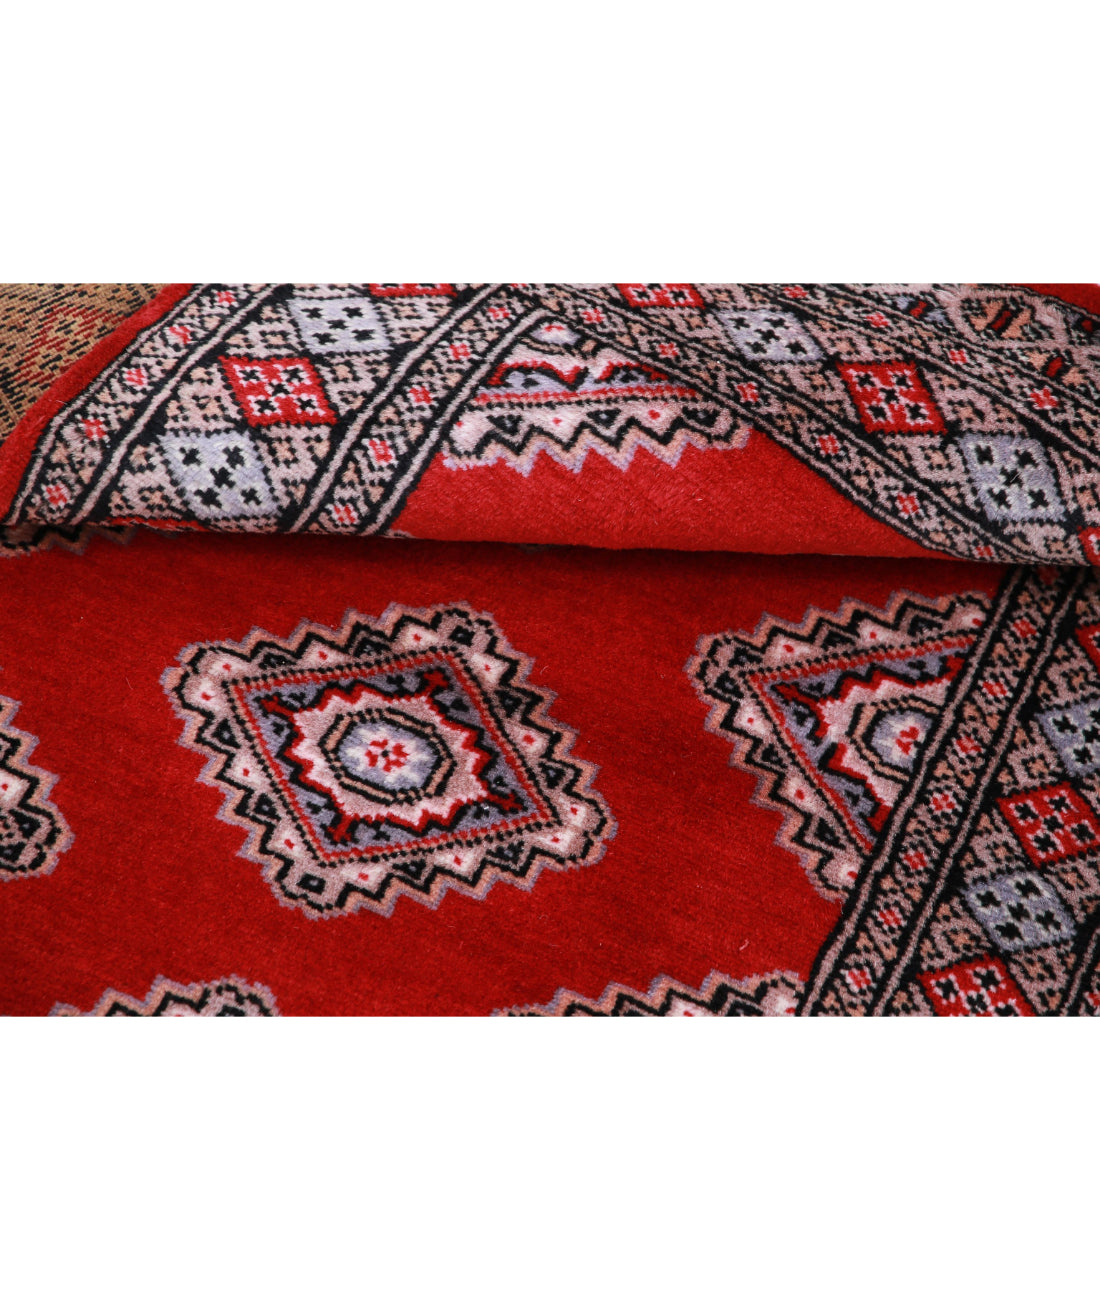 Hand Knotted Tribal Bokhara Wool Rug - 2'6'' x 4'2'' 2'6'' x 4'2'' (75 X 125) / Red / Blue